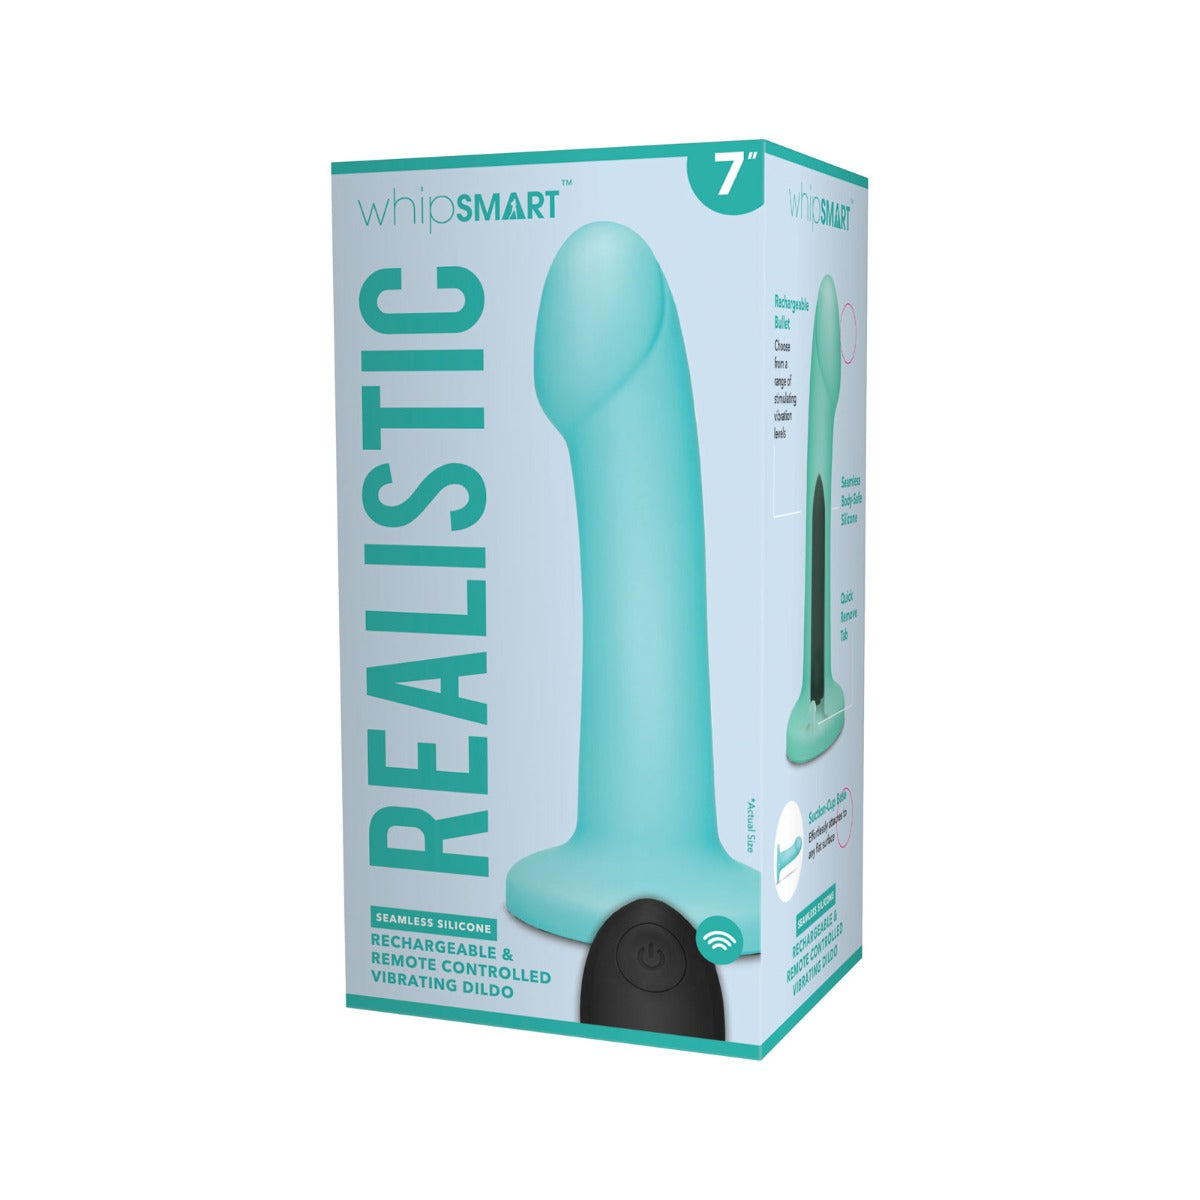 Suction Base Dildos Whipsmart 7 Inch Remote Control Vibrating Dildo - Blue   